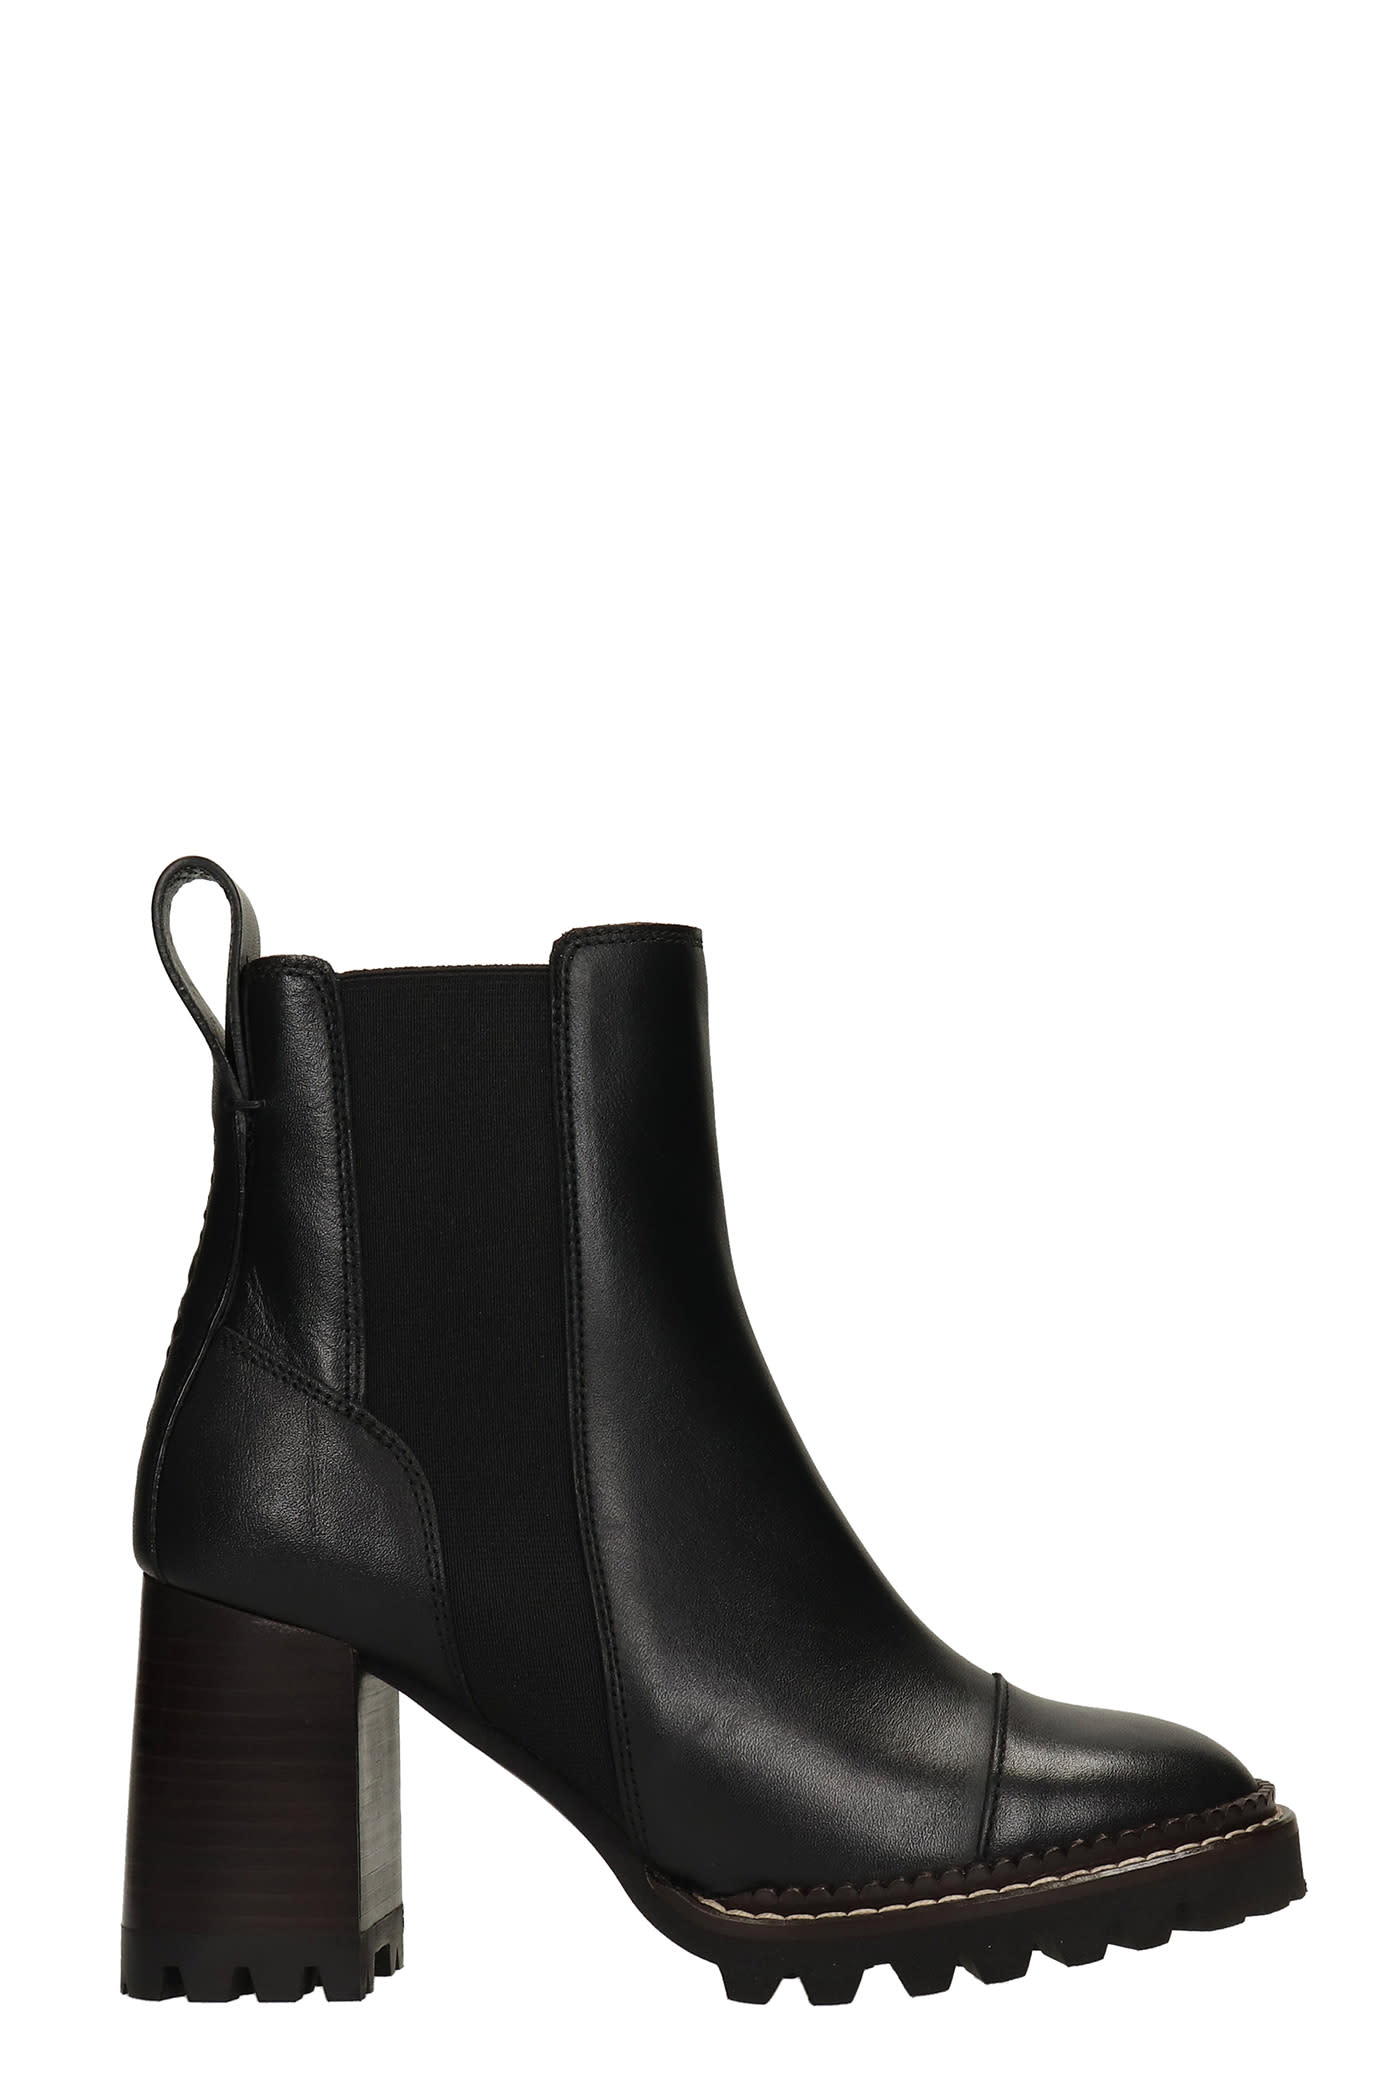 See by Chloé Mallory High Heels Ankle Boots In Black Leather